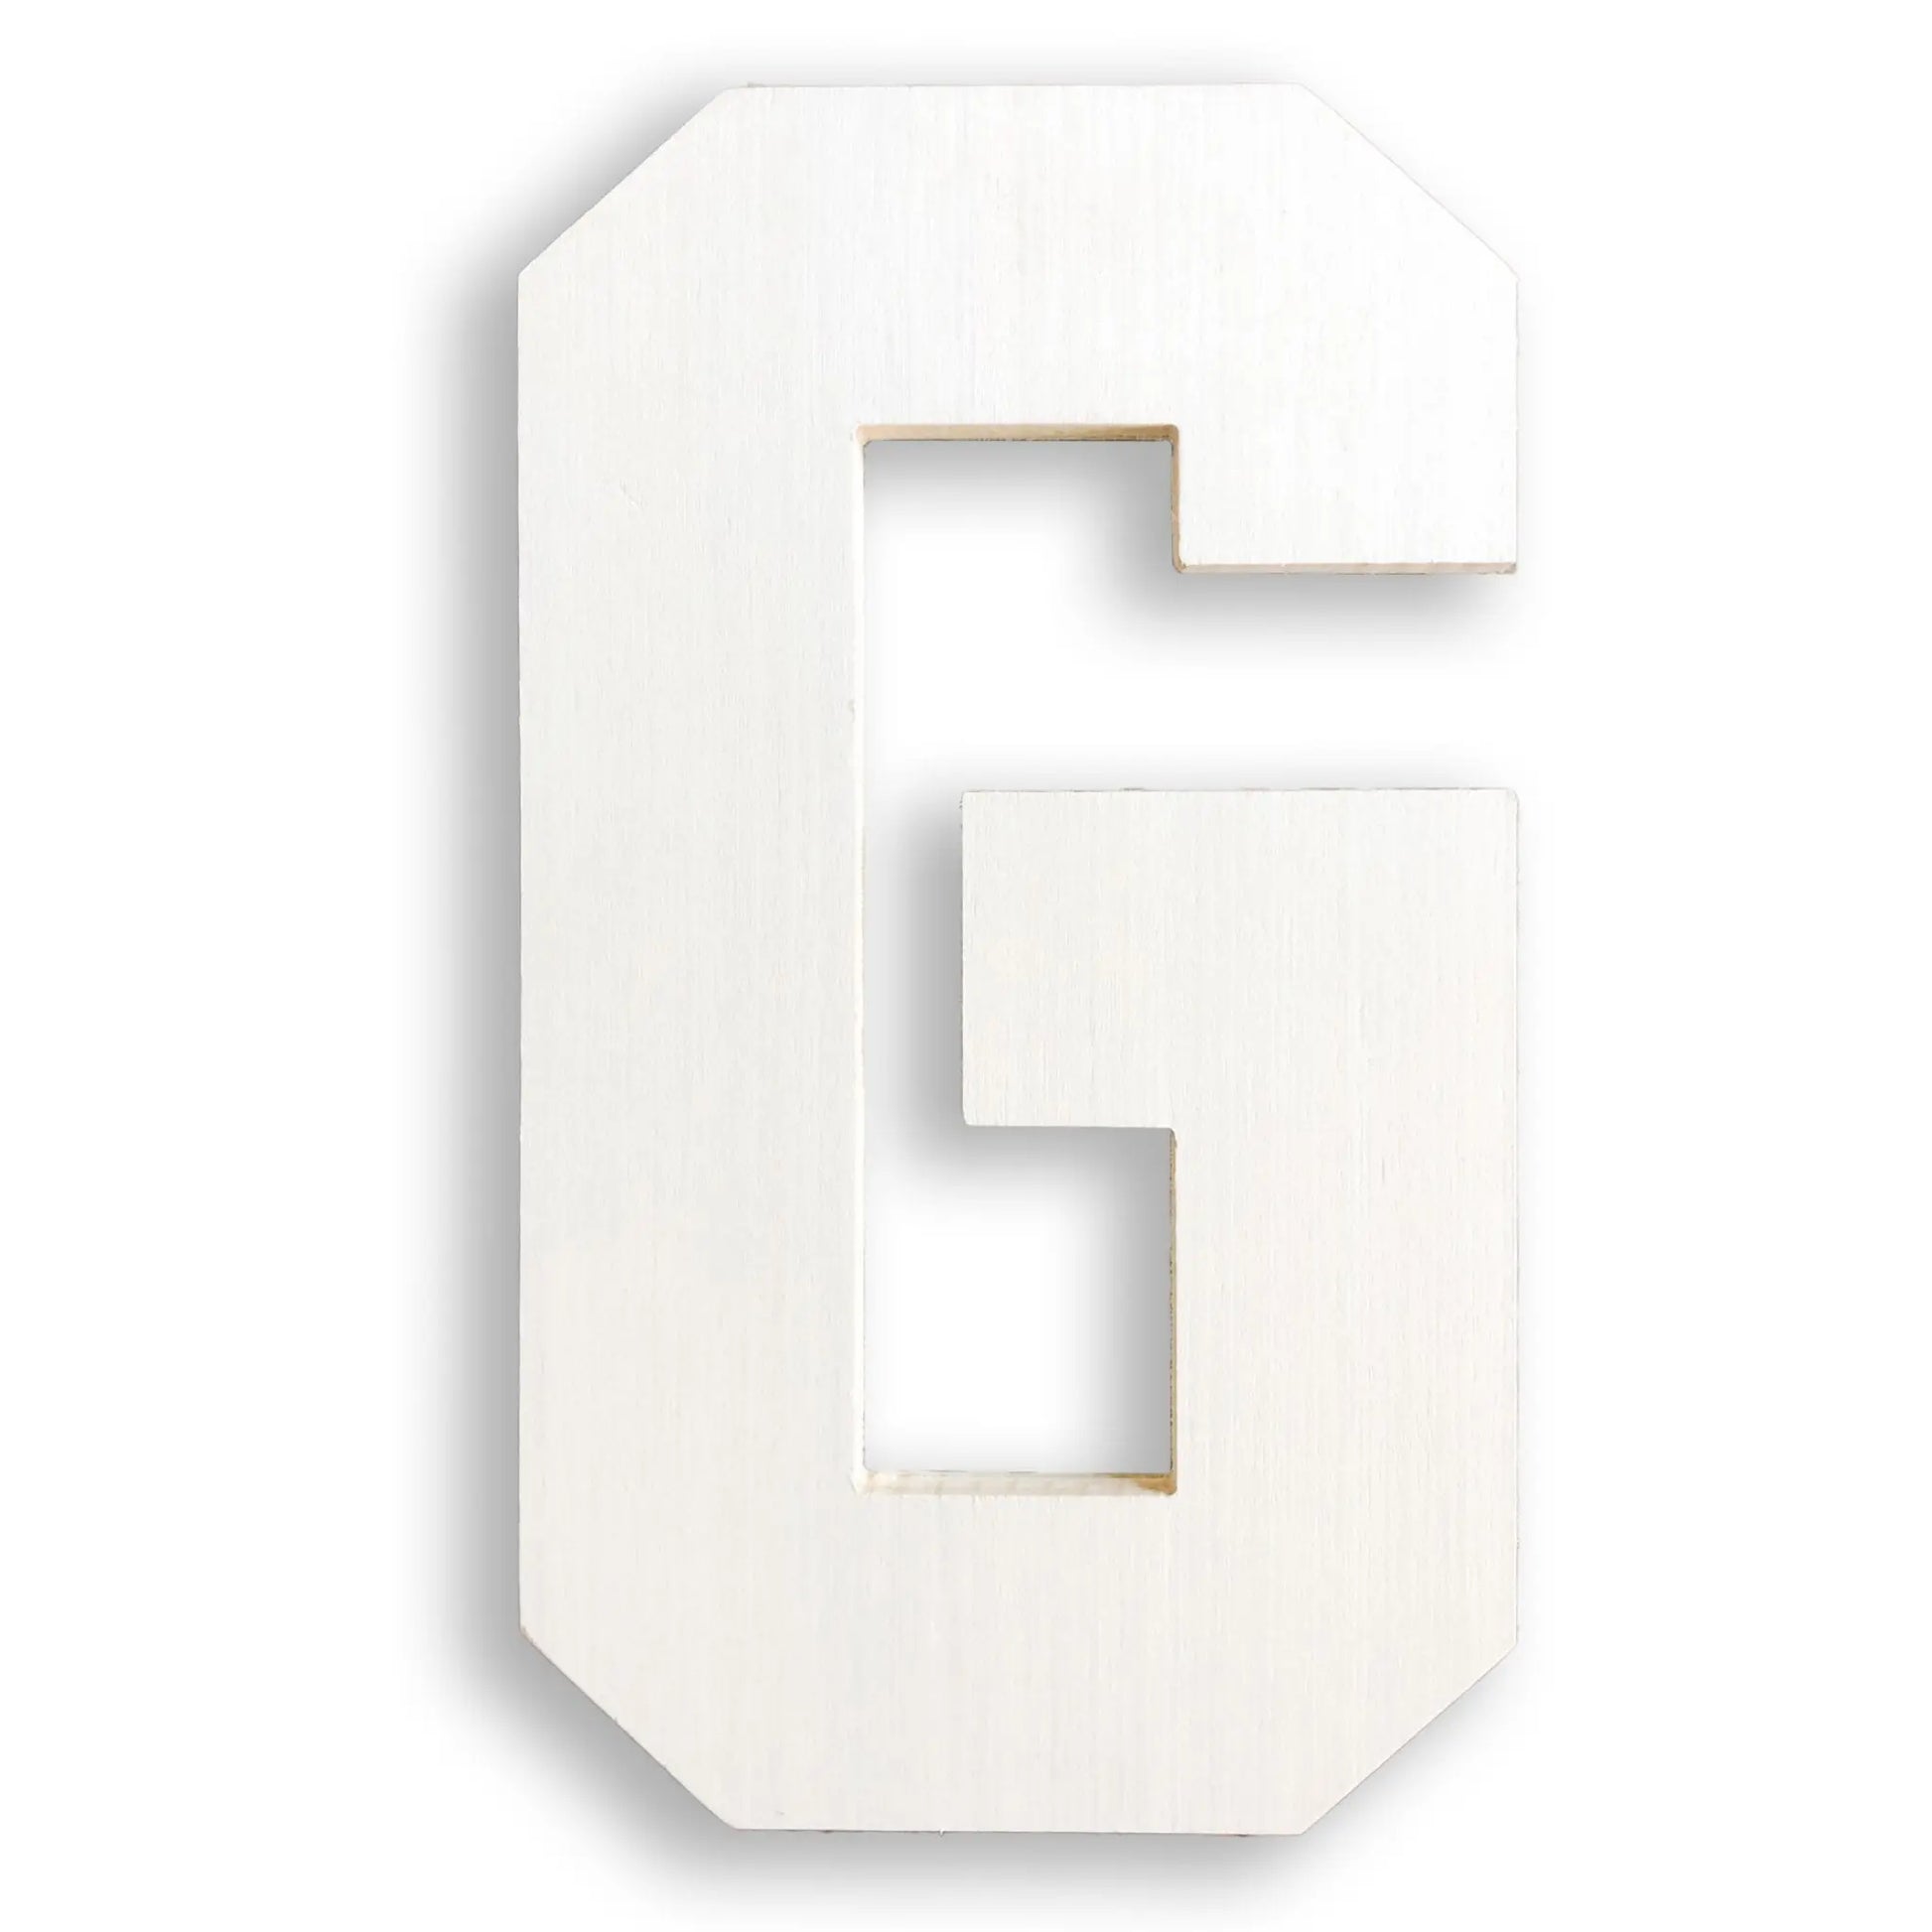 Package of 1, 6 Inch X 3/4 Thickness Baltic Birch Wood Letter g